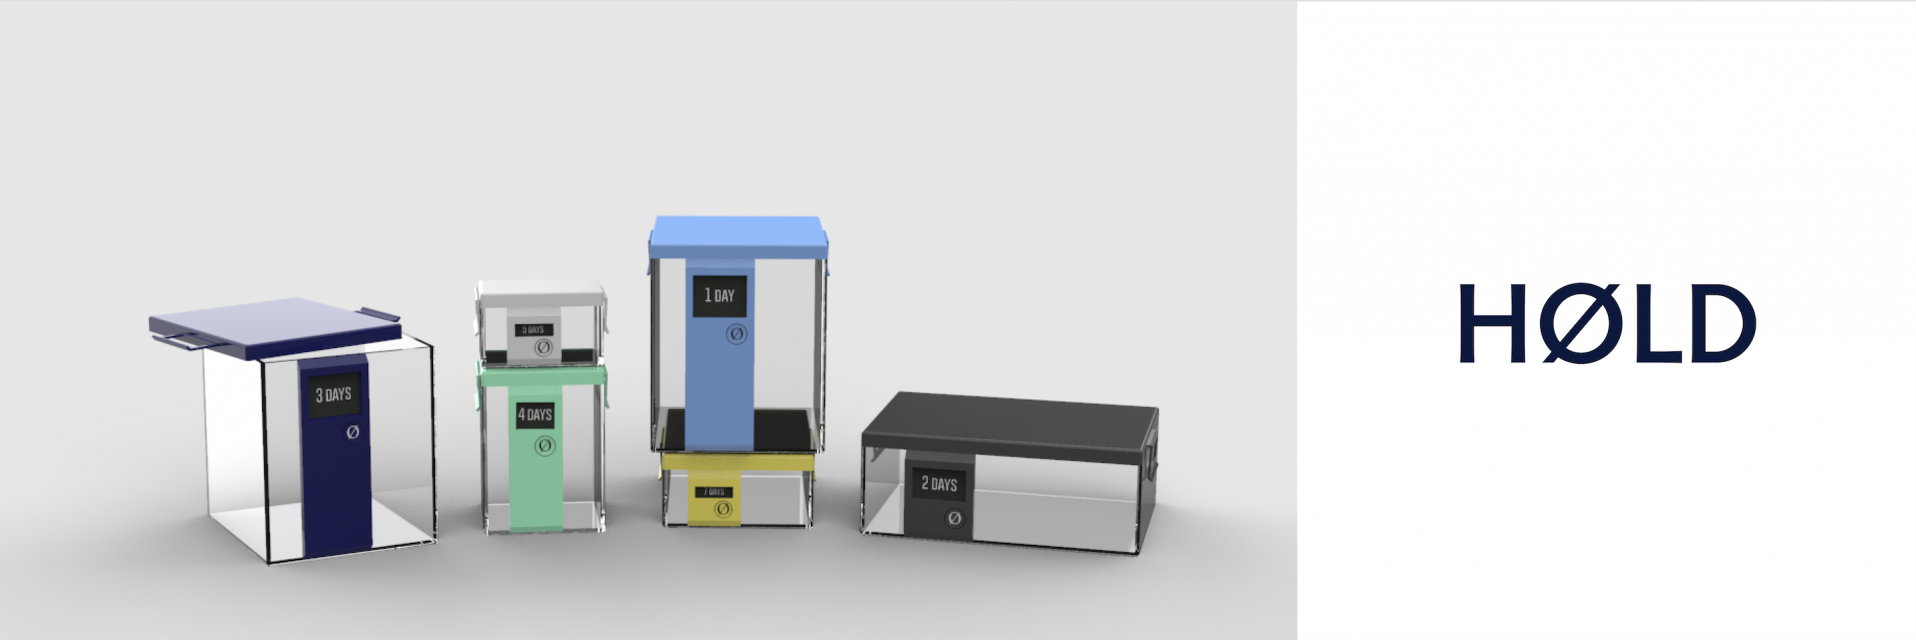 A render of four food-storage containers, with the brand name on the right.